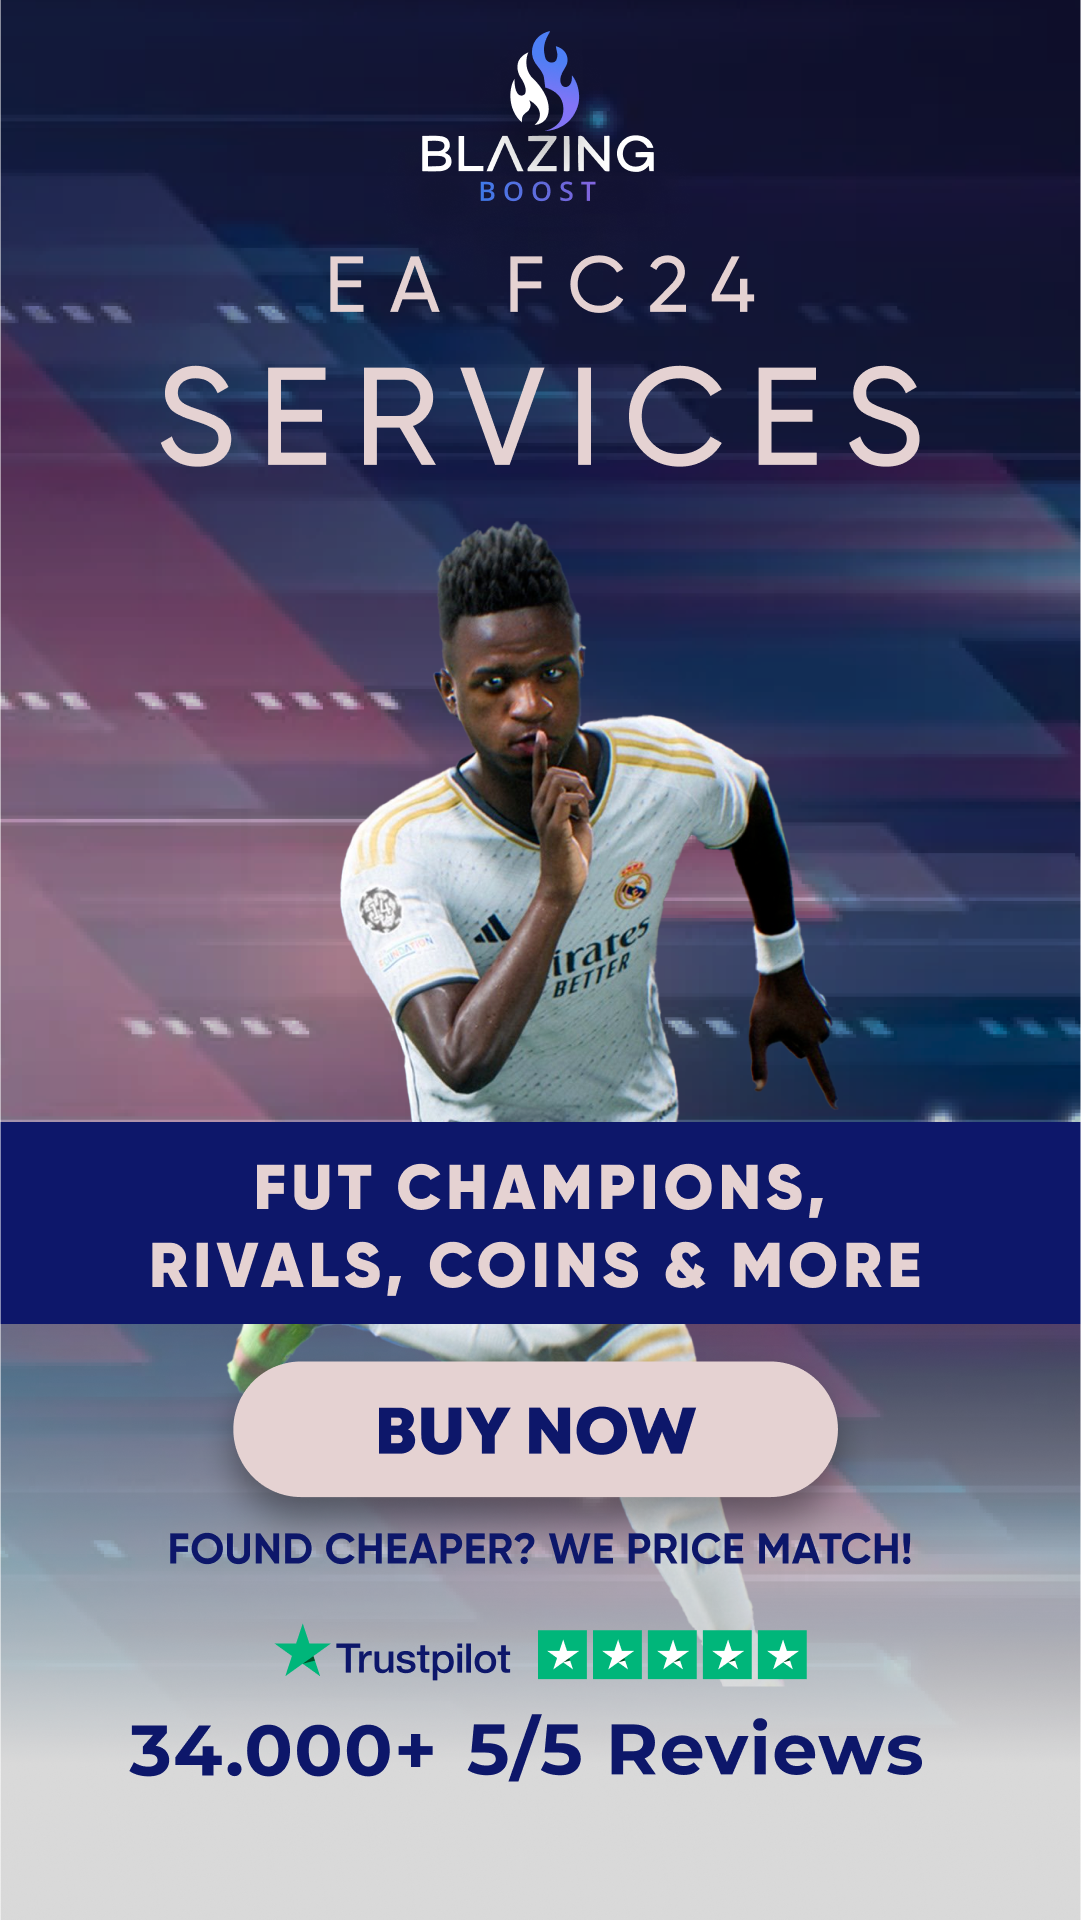 BlazingBoost - Premium EA FC 24 Services - Coins, Boosting, Coaching - Since 2012 - 34k+ TP Reviews-fc24_banner2-png